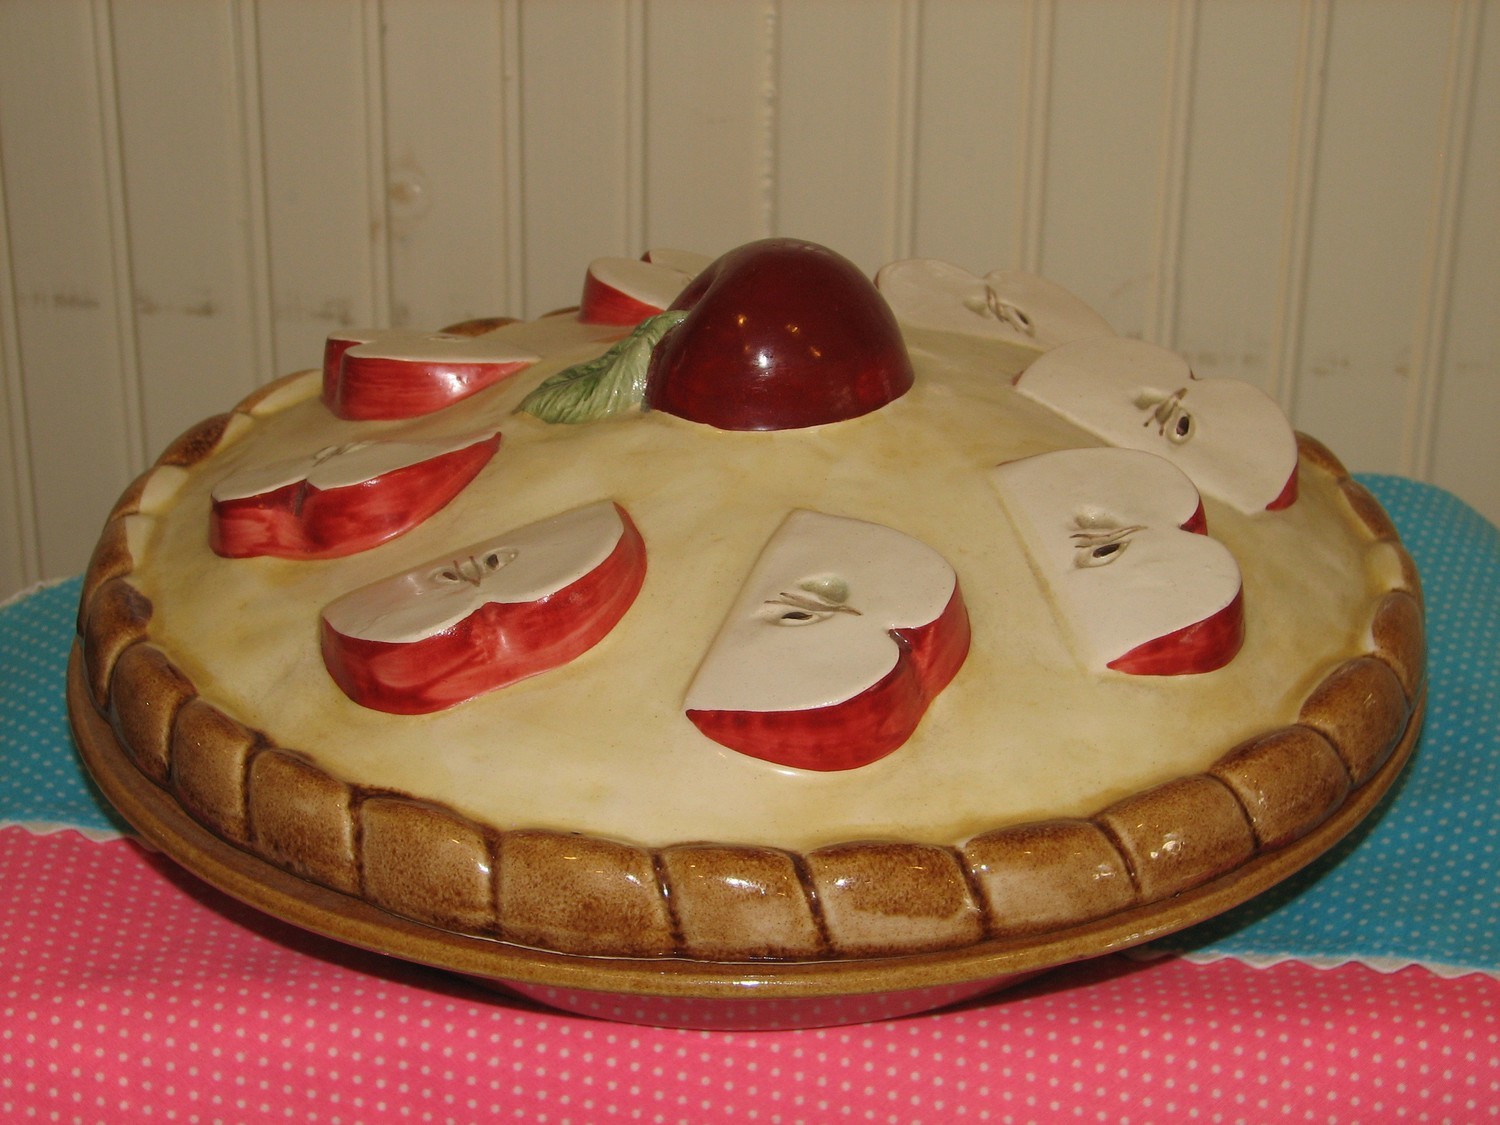 Over & Back Ceramic Pie Keeper. Cover Has Apples on Top